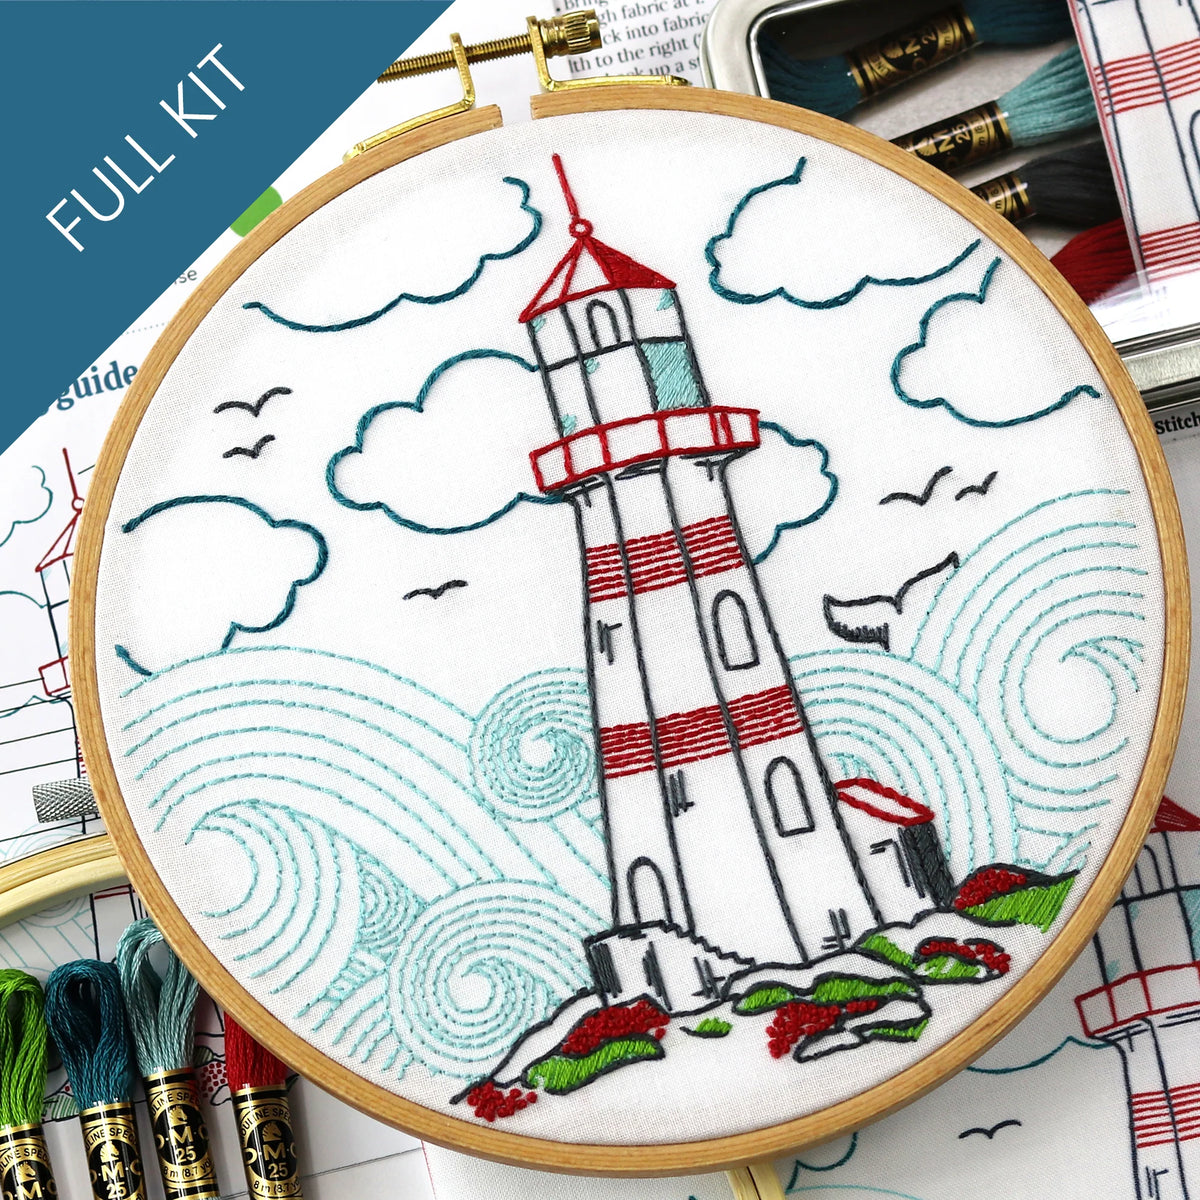 Stitched Stories Embroidery Kits - ON SALE!